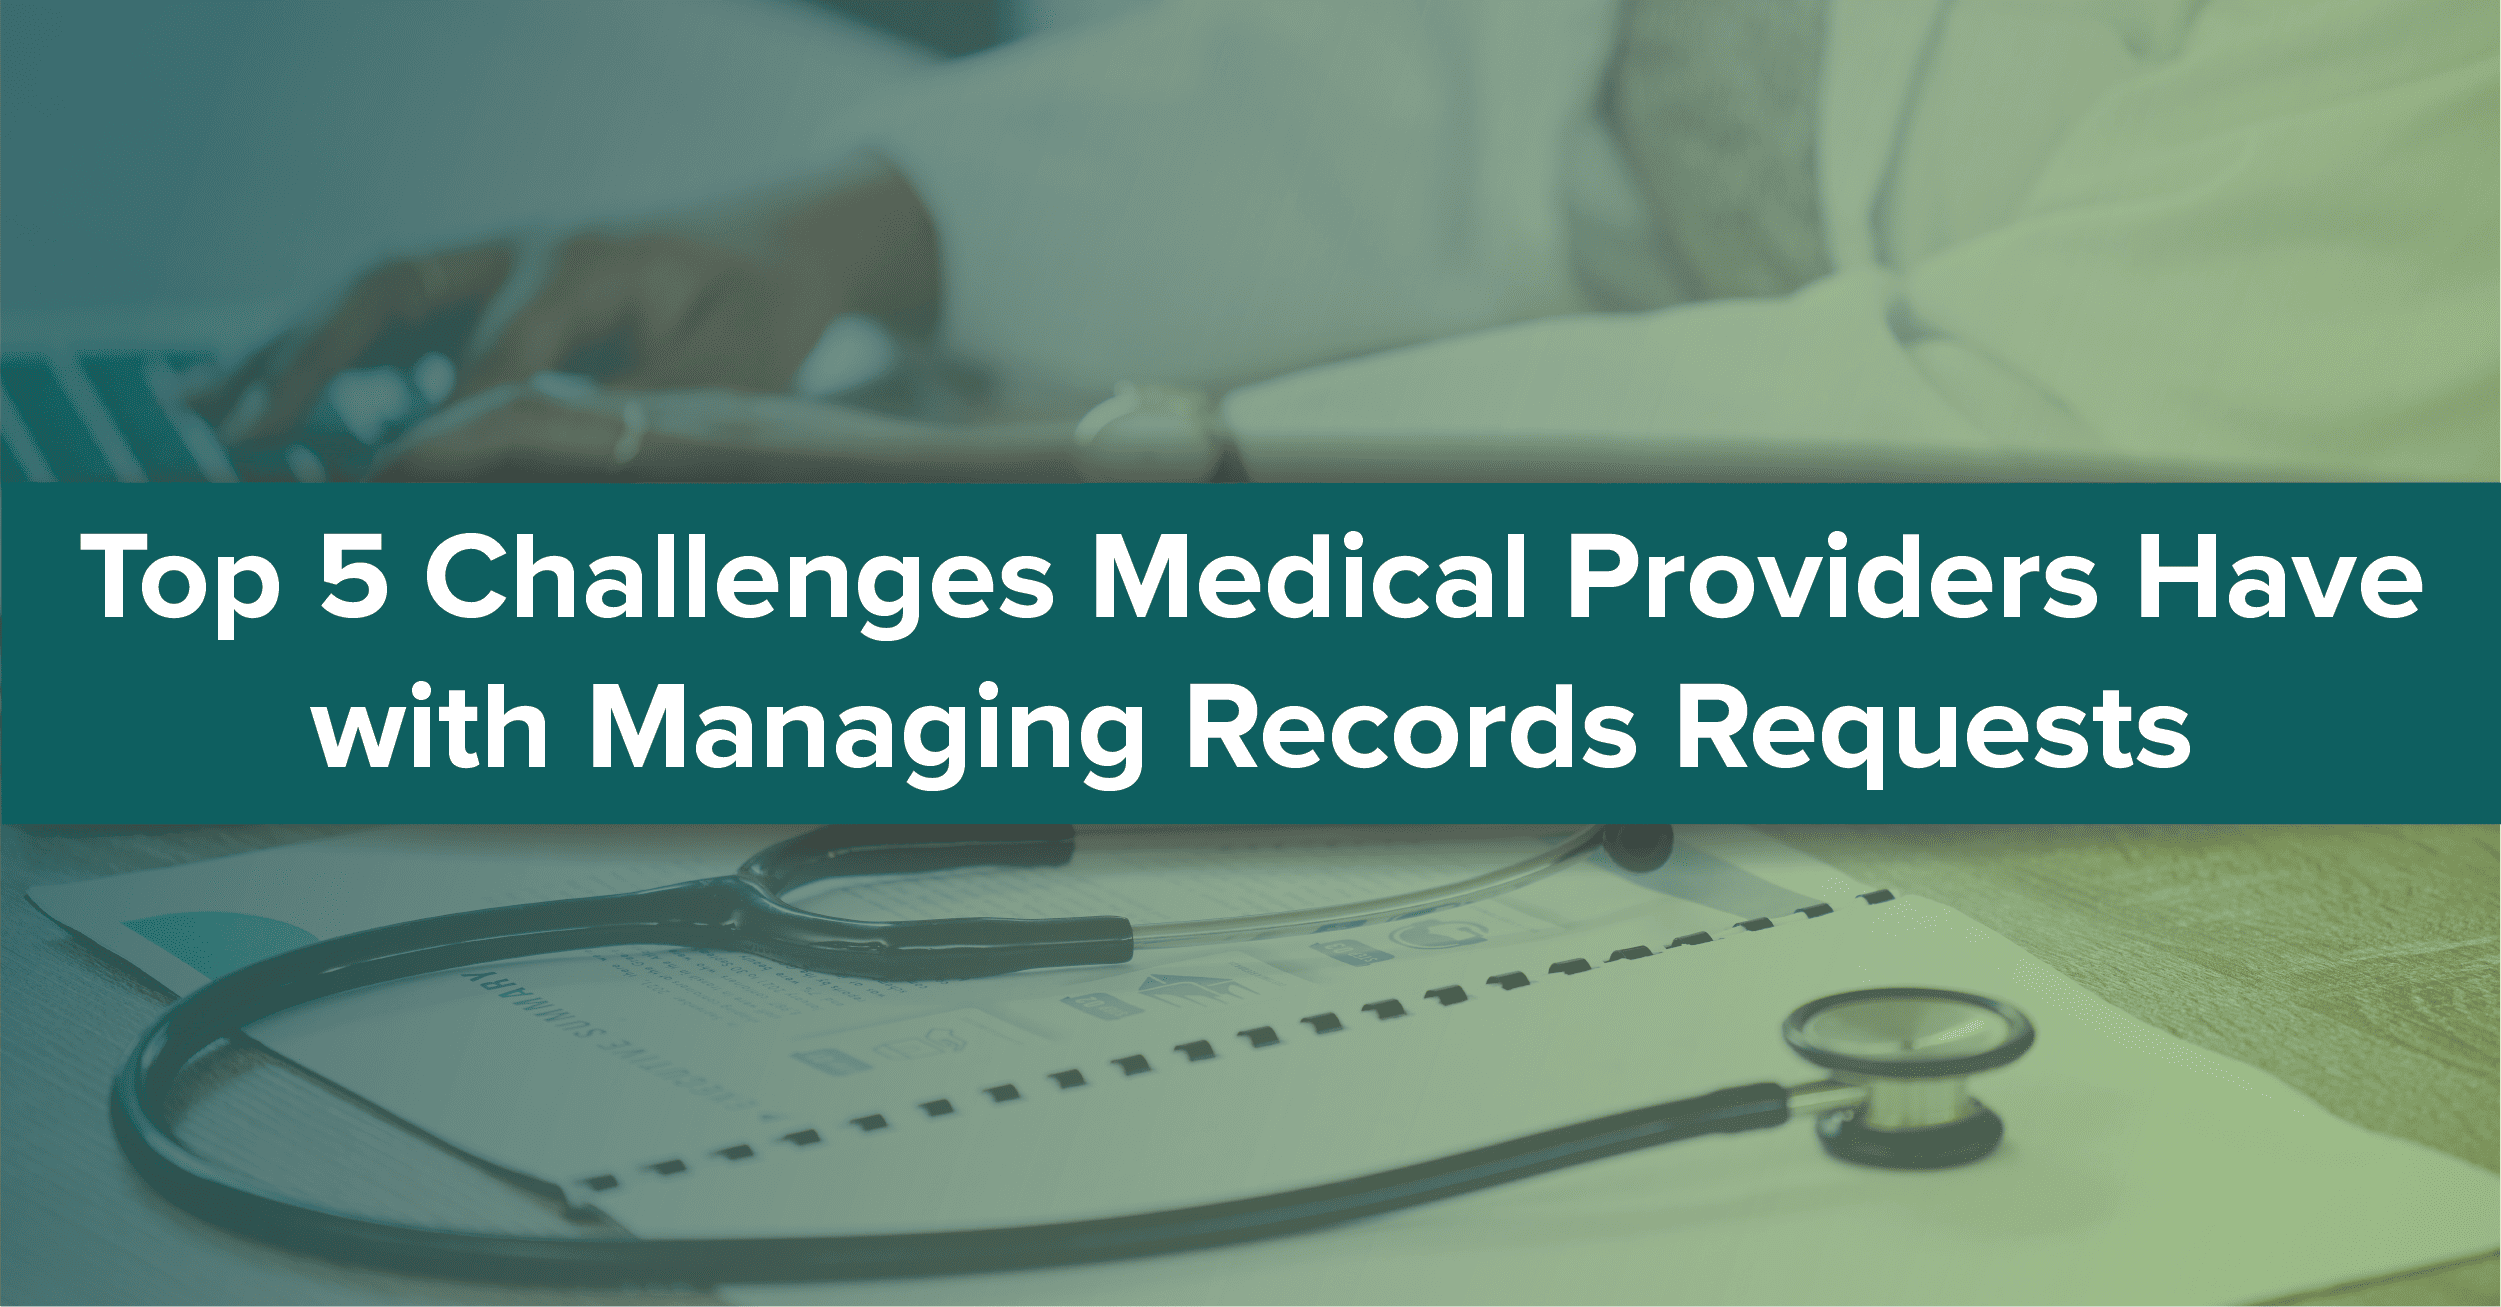 Top 5 Challenges Medical Providers Have with Managing Records Requests